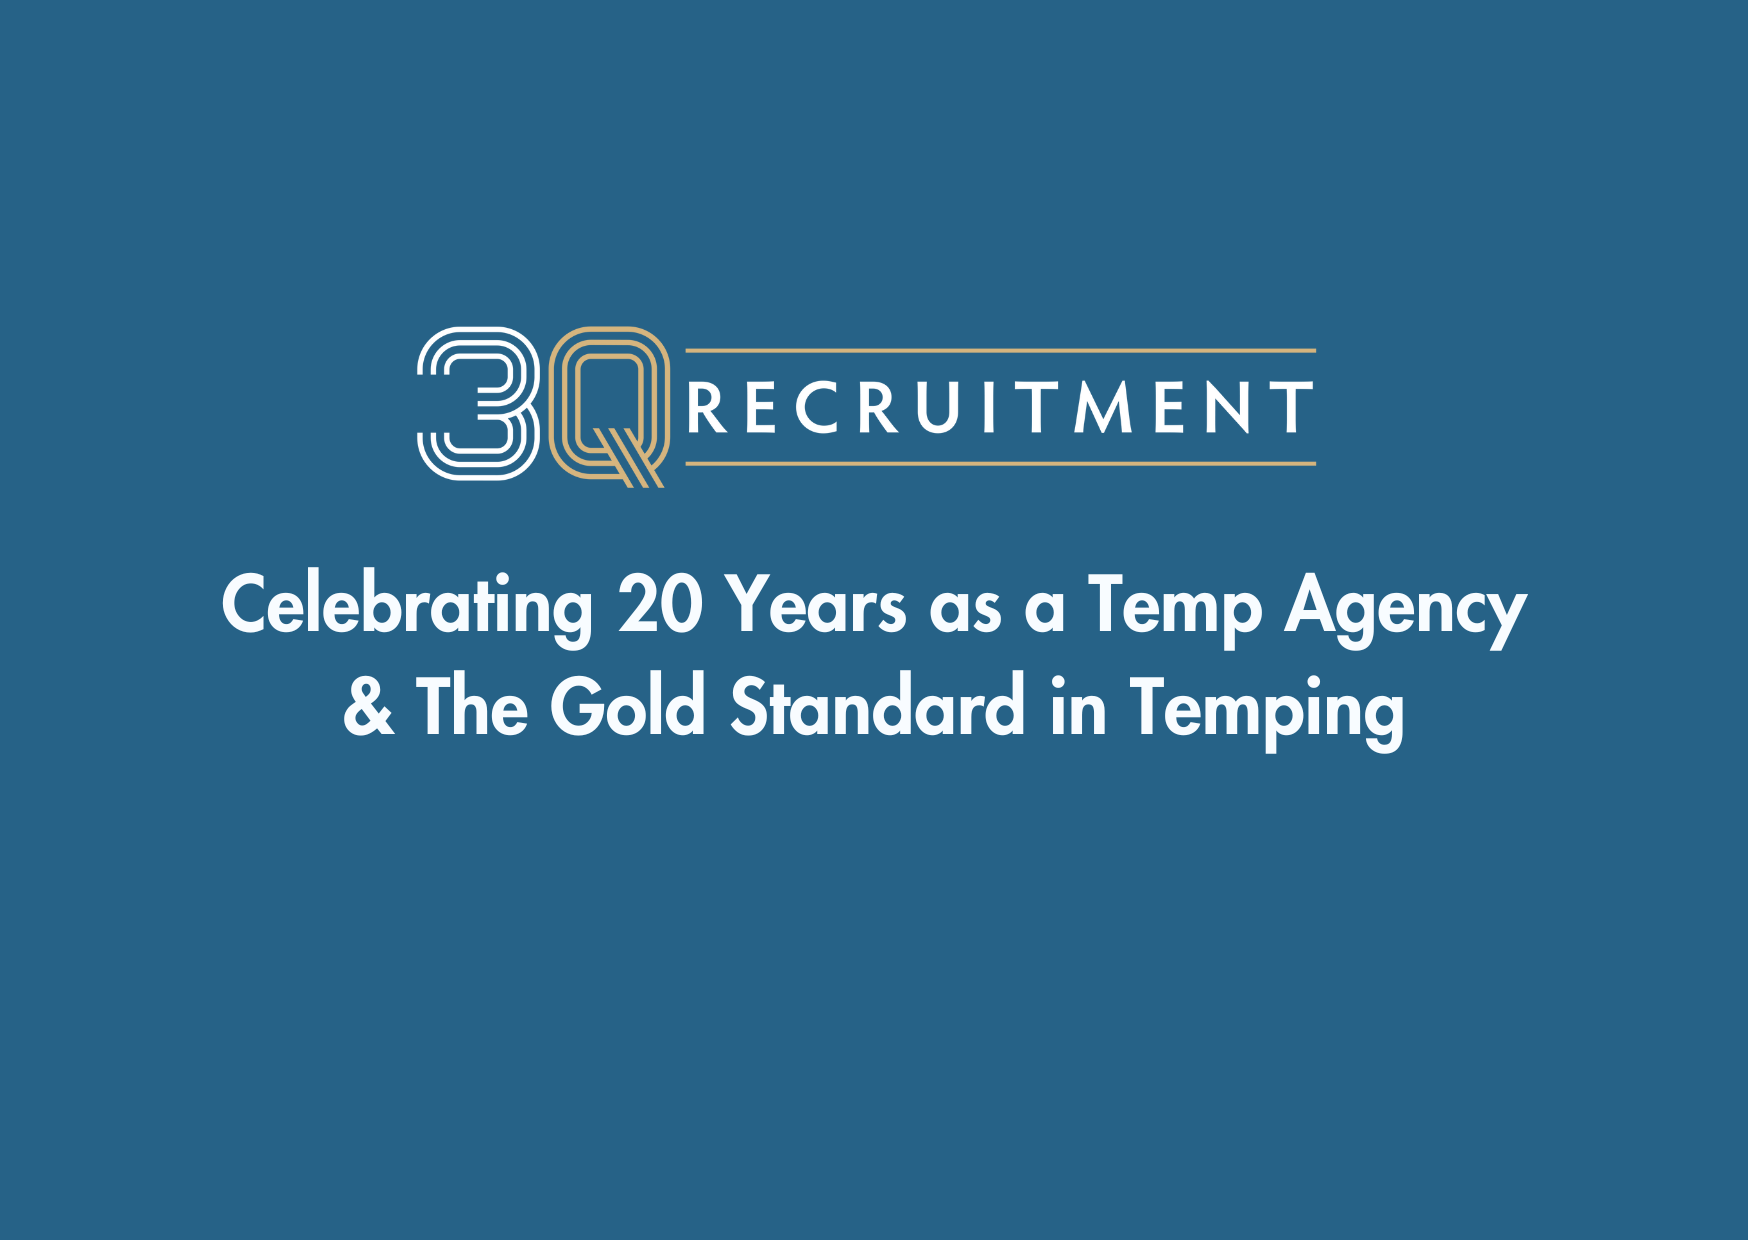 3Q Recruitment Celebrating 20 Years as a Temp Agency & The Gold Standard in Temping